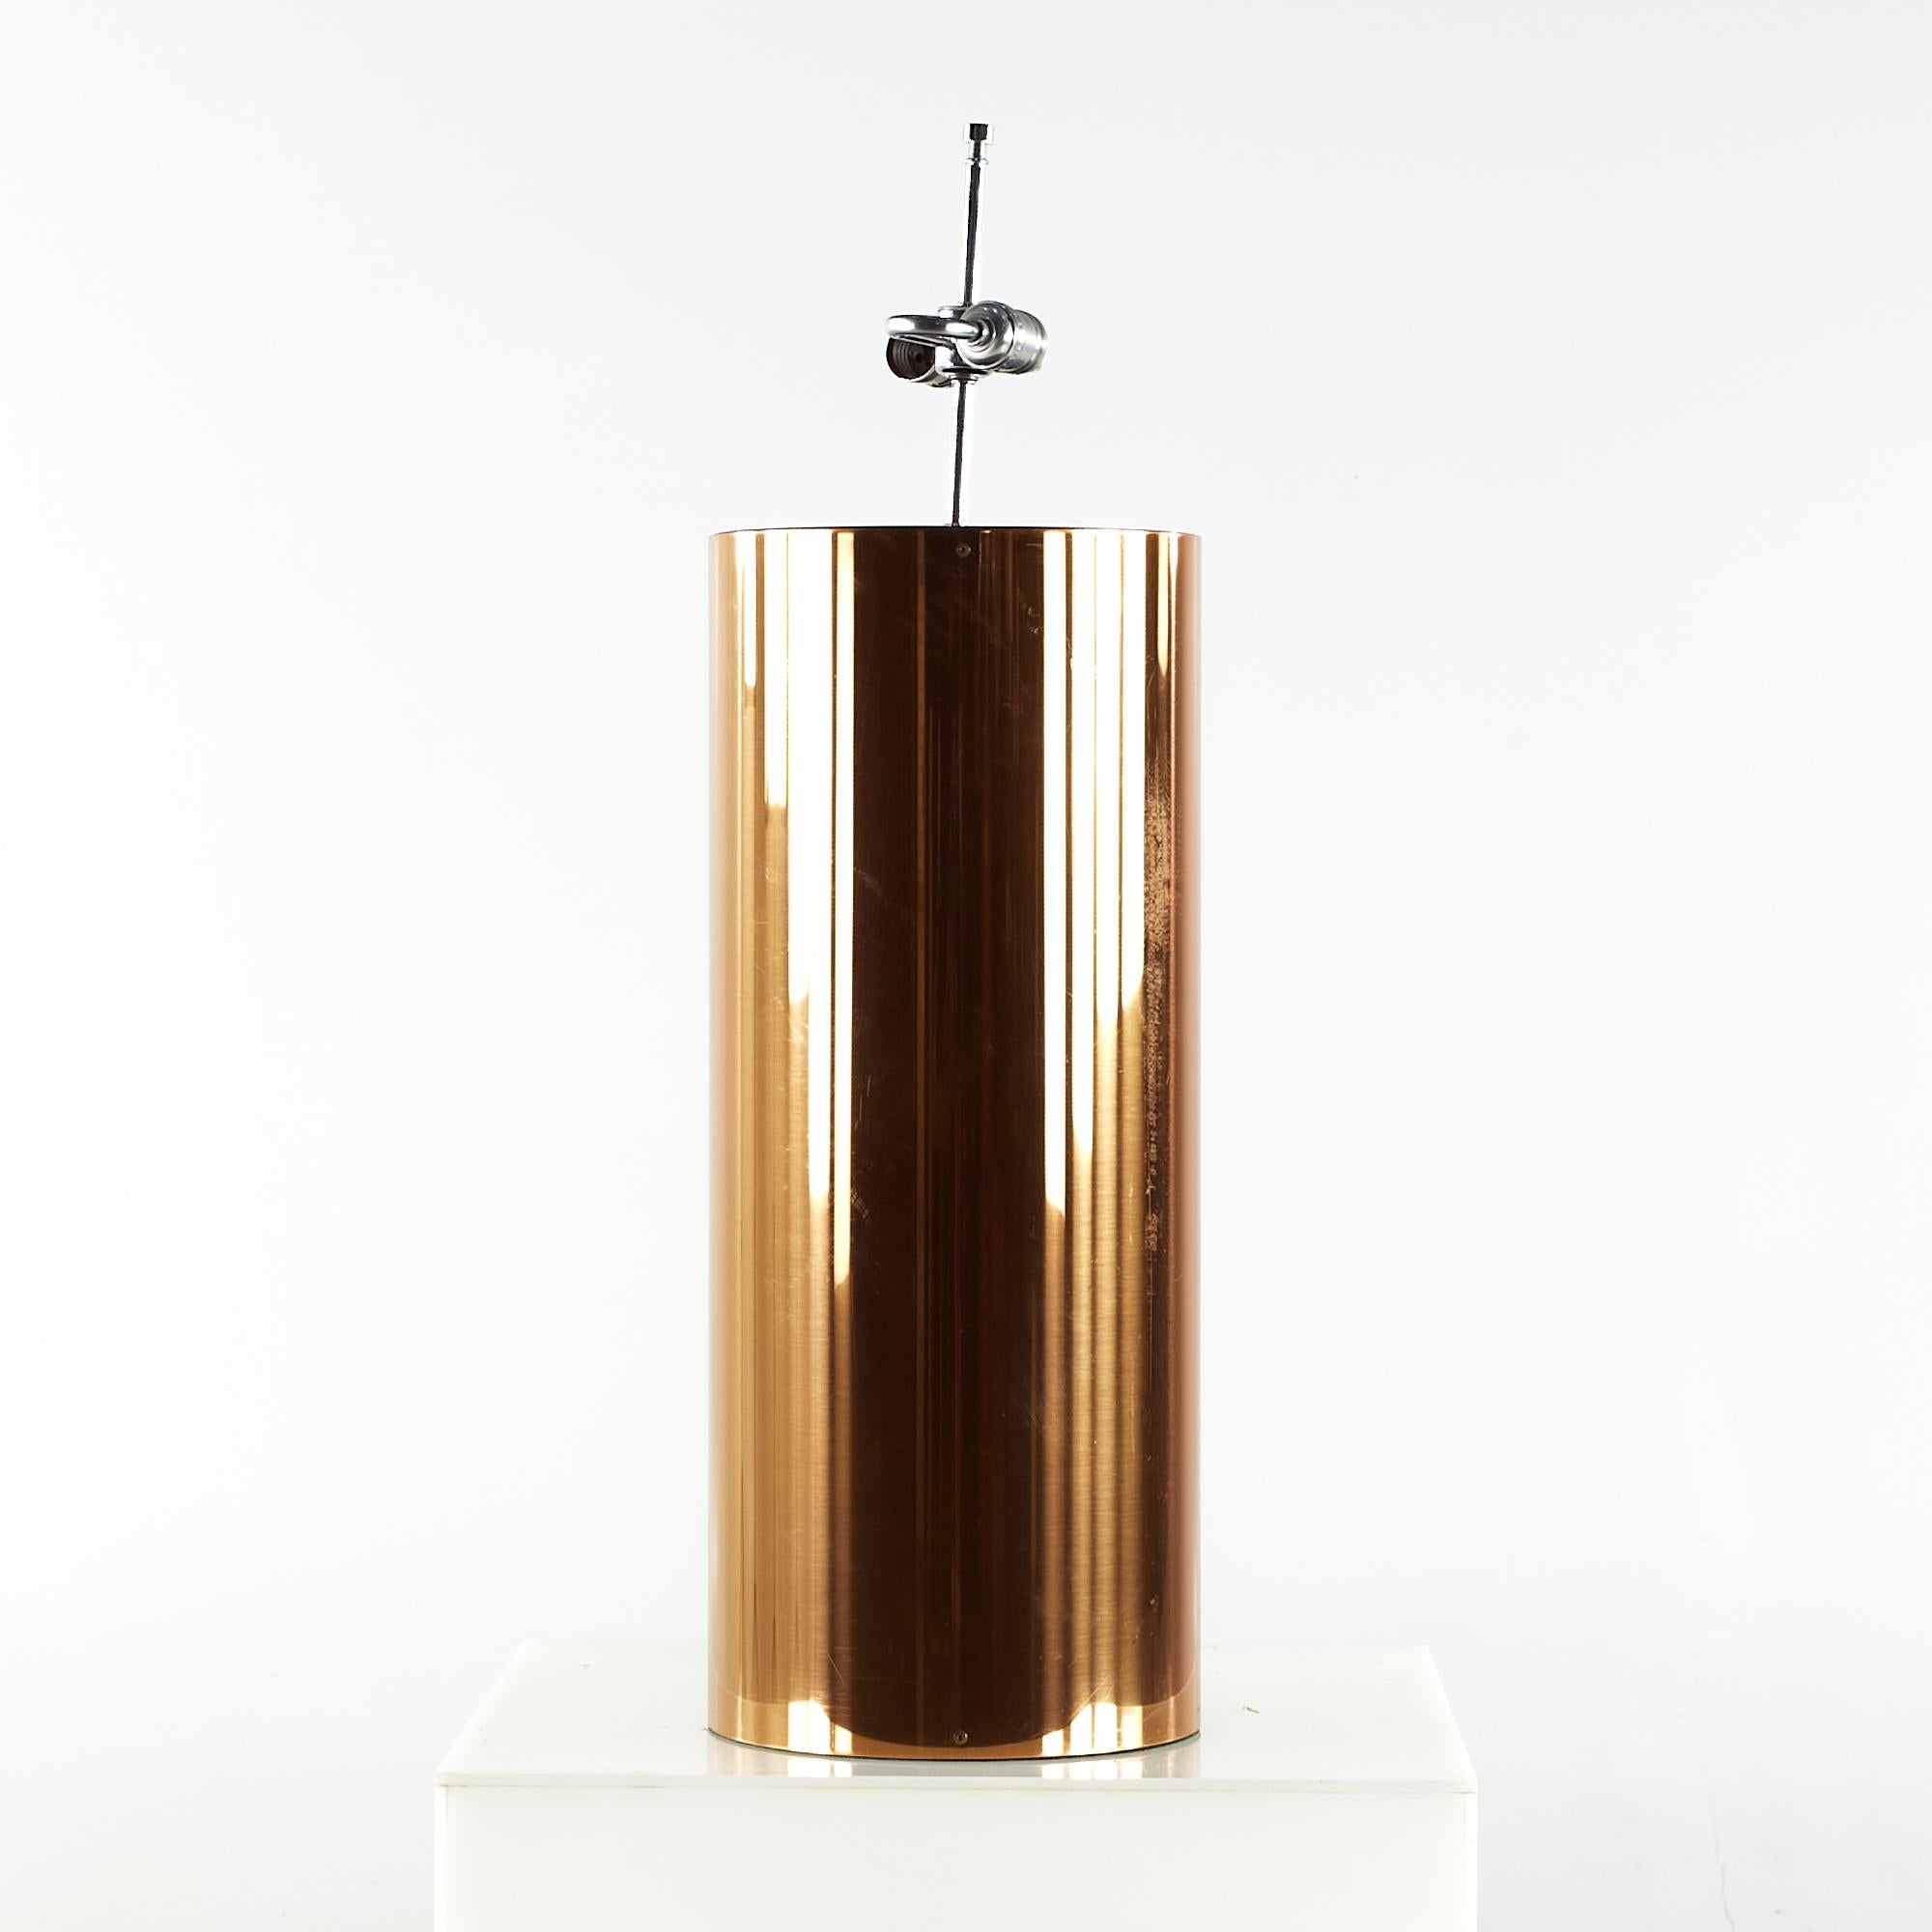 Kovacs midcentury Copper Large Table Lamp

This lamp measures: 10 wide x 10 deep x 32.5 inches high

We take our photos in a controlled lighting studio to show as much detail as possible. We do not photoshop out blemishes. 

We keep you fully